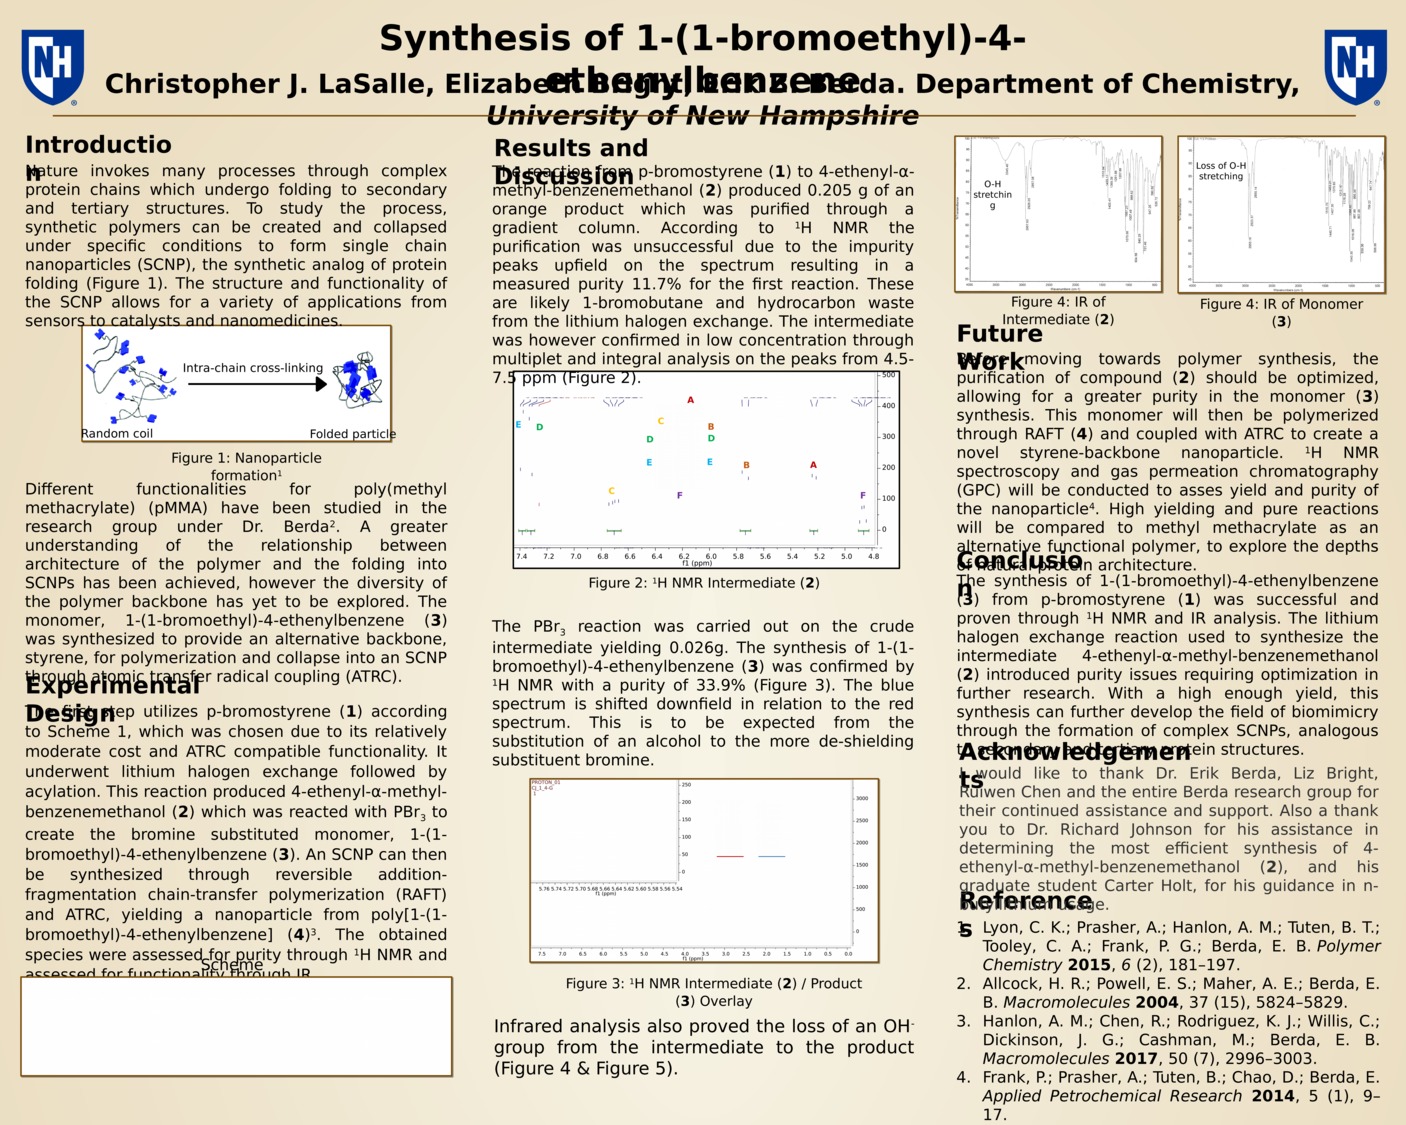 Synthesis Of 4-(1-Bromoethyl)Styrene By Chris Lasalle by cjl1014